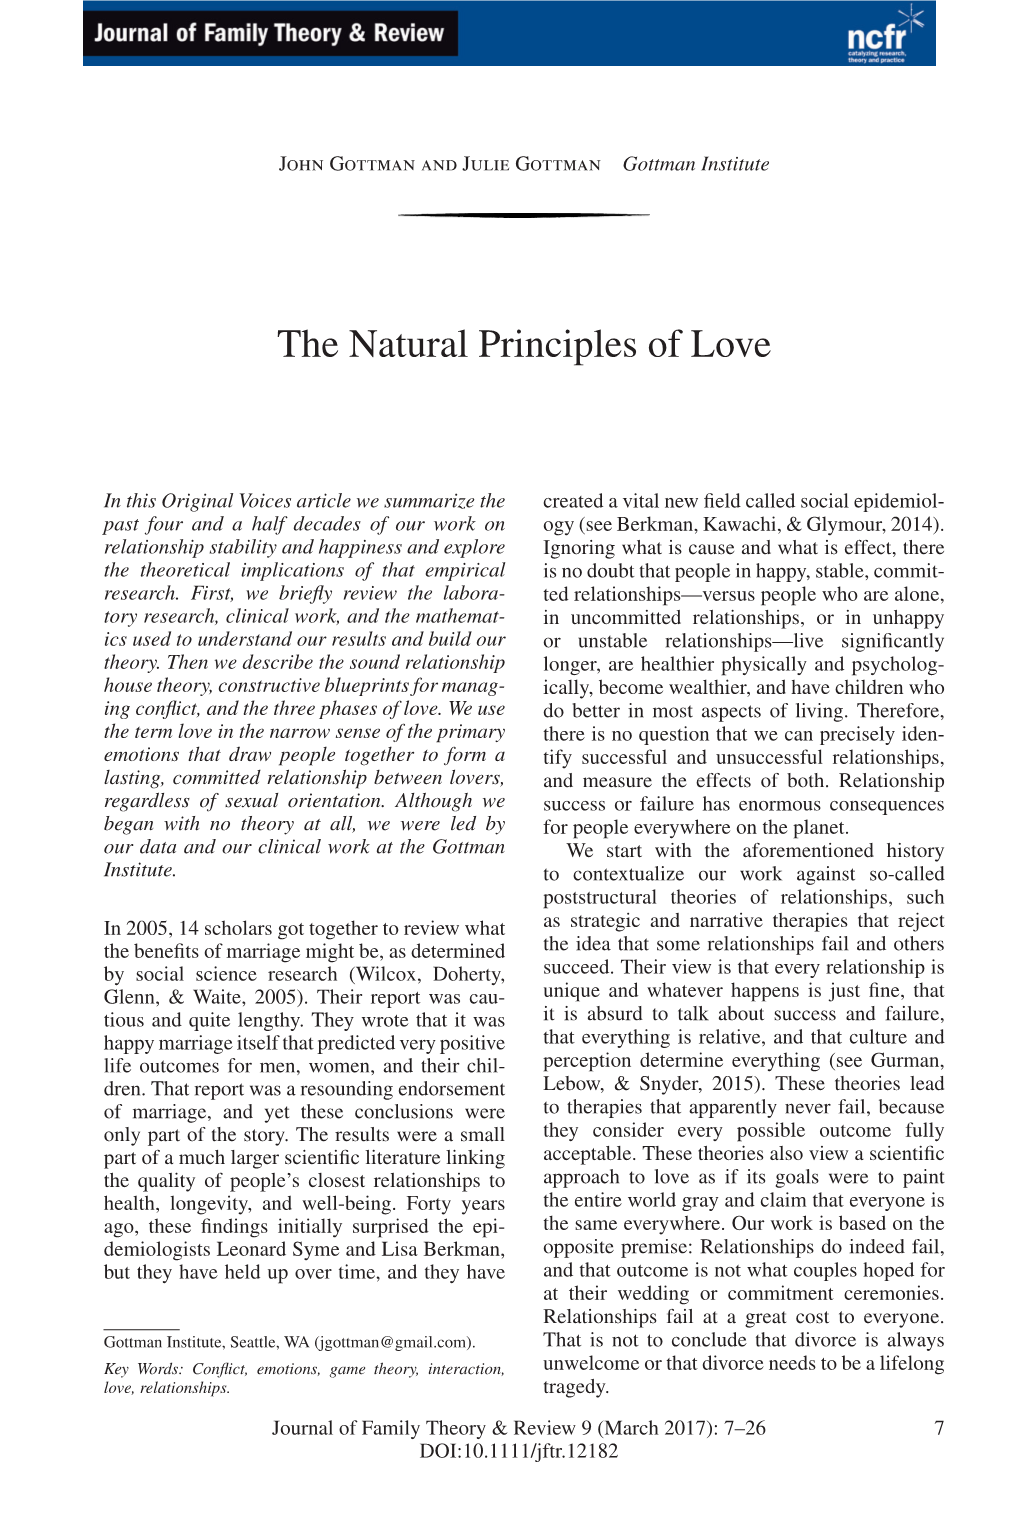 The Natural Principles of Love